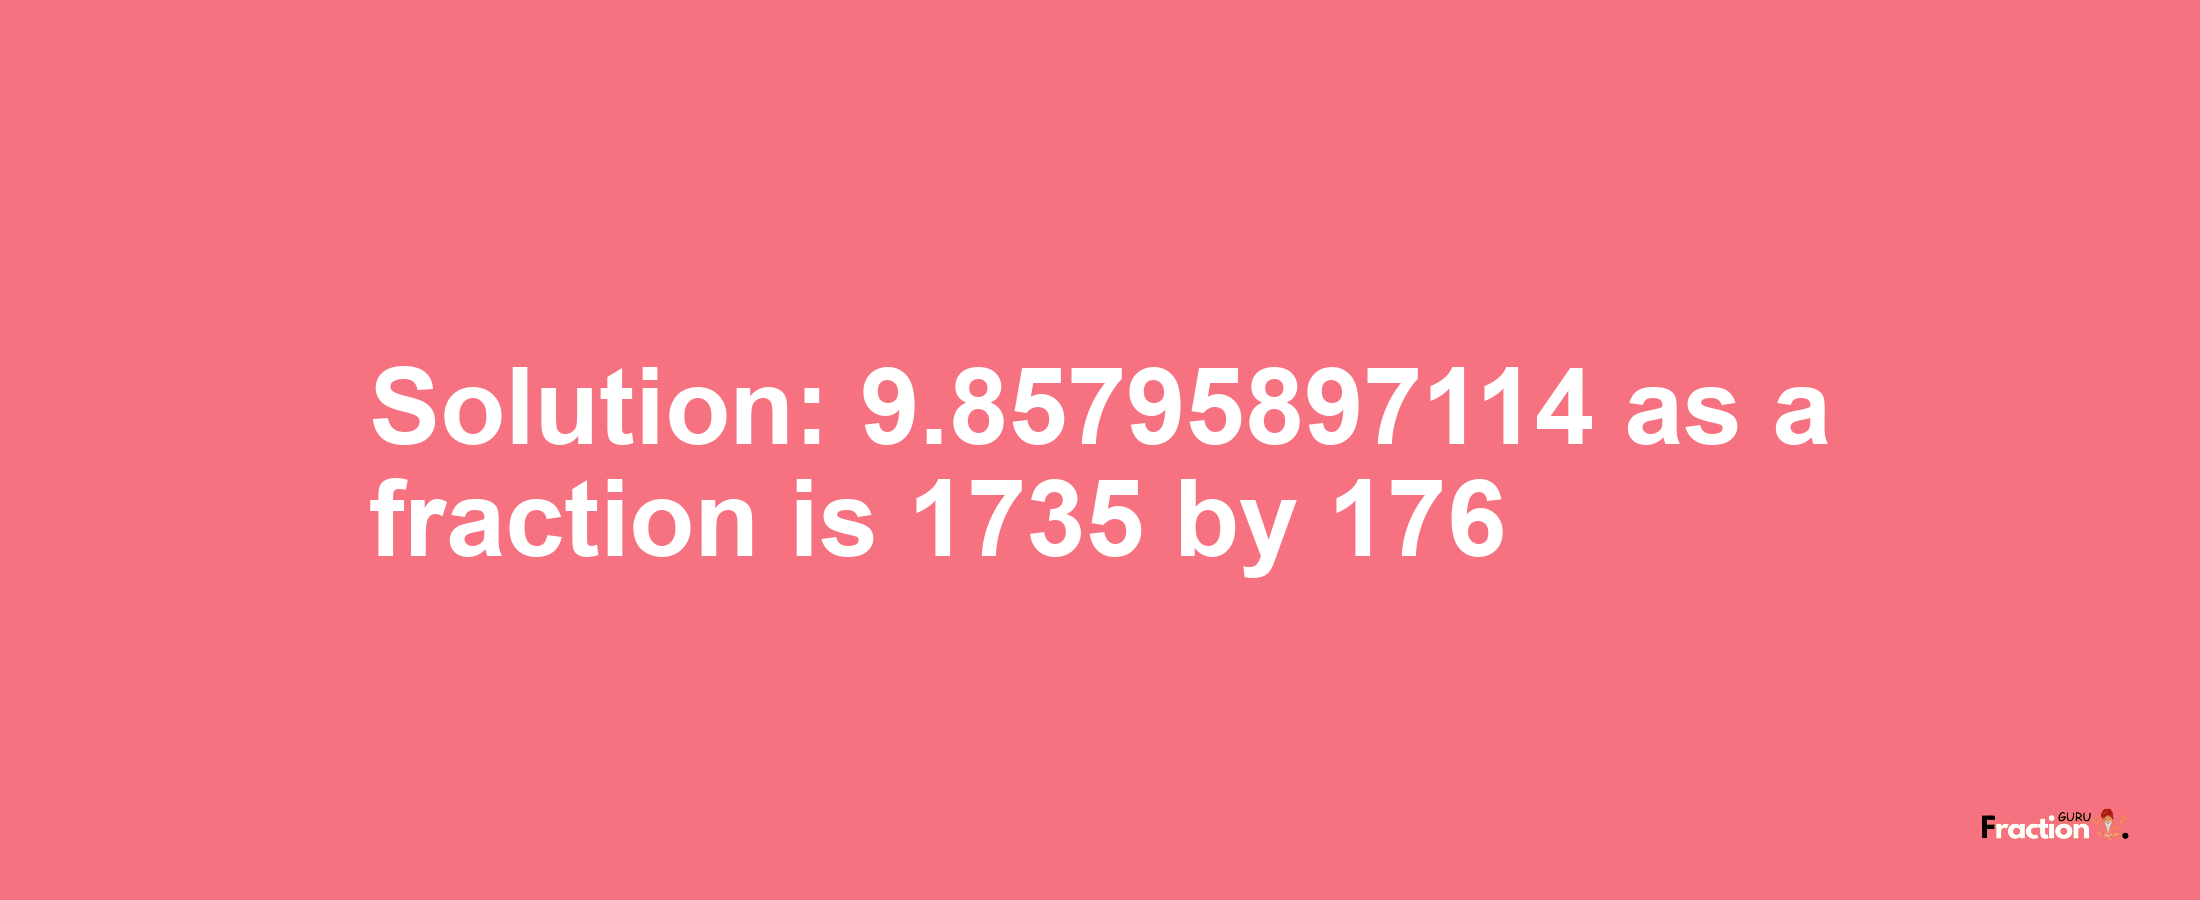 Solution:9.85795897114 as a fraction is 1735/176